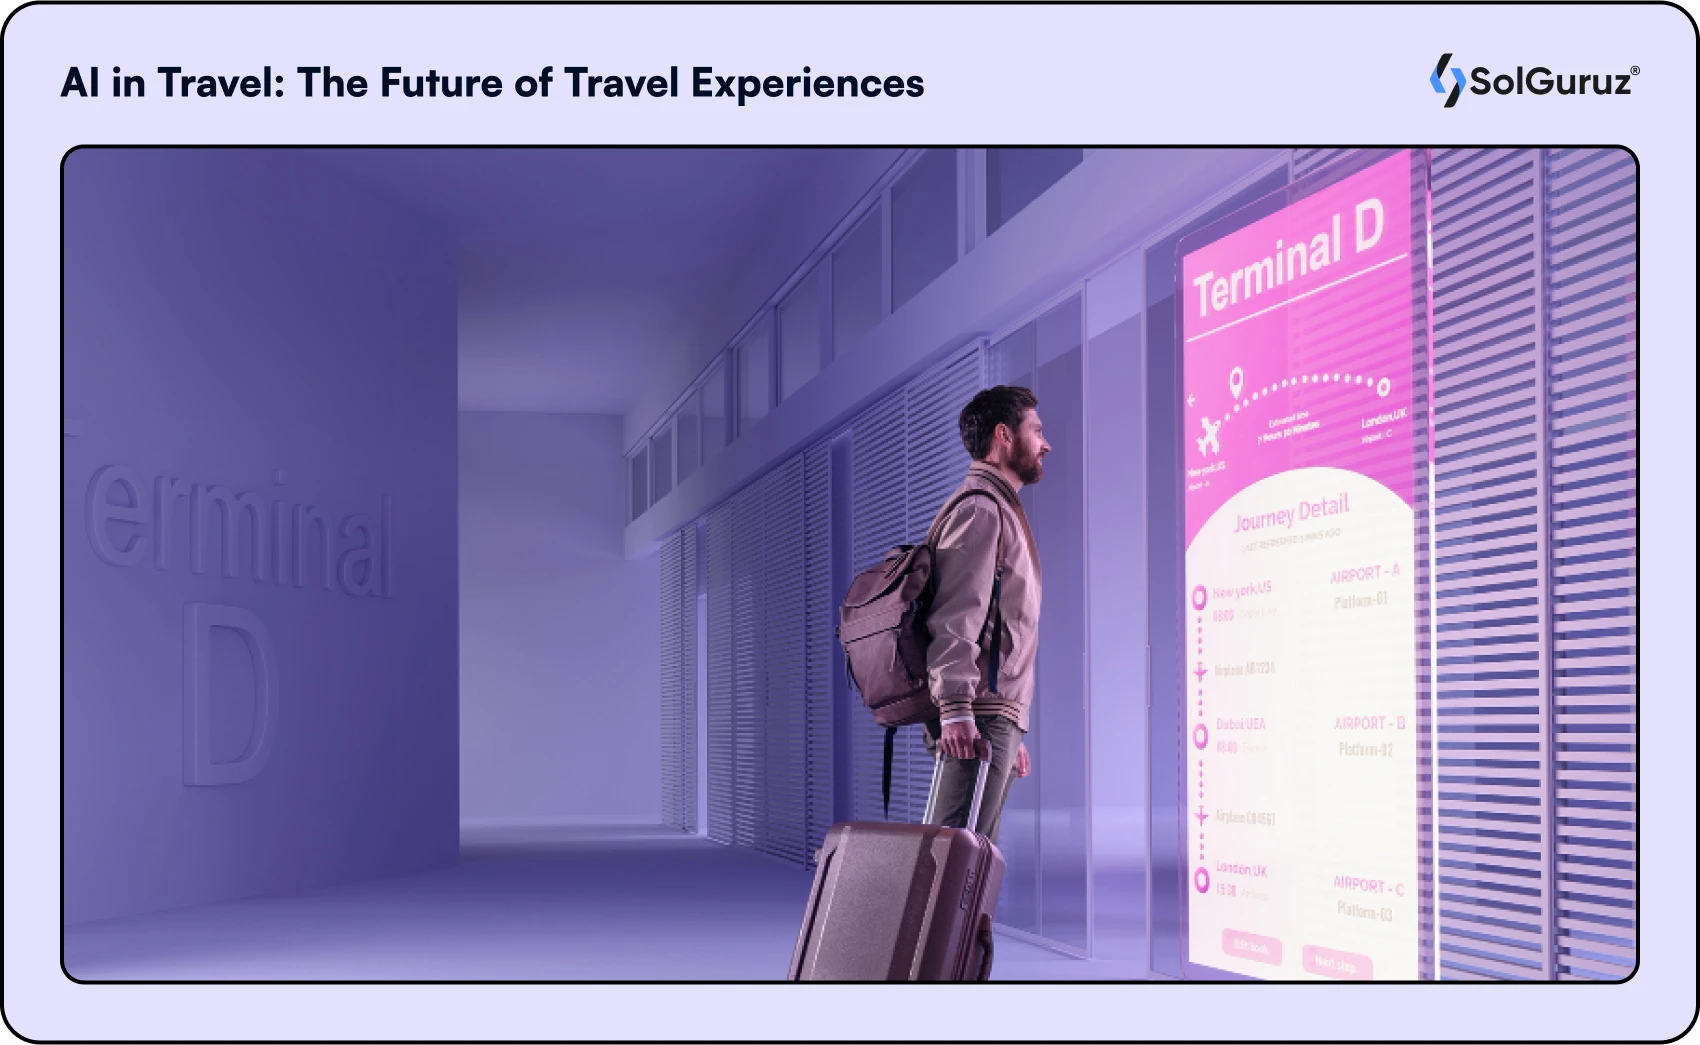 AI in Travel: The Future of Travel Experiences